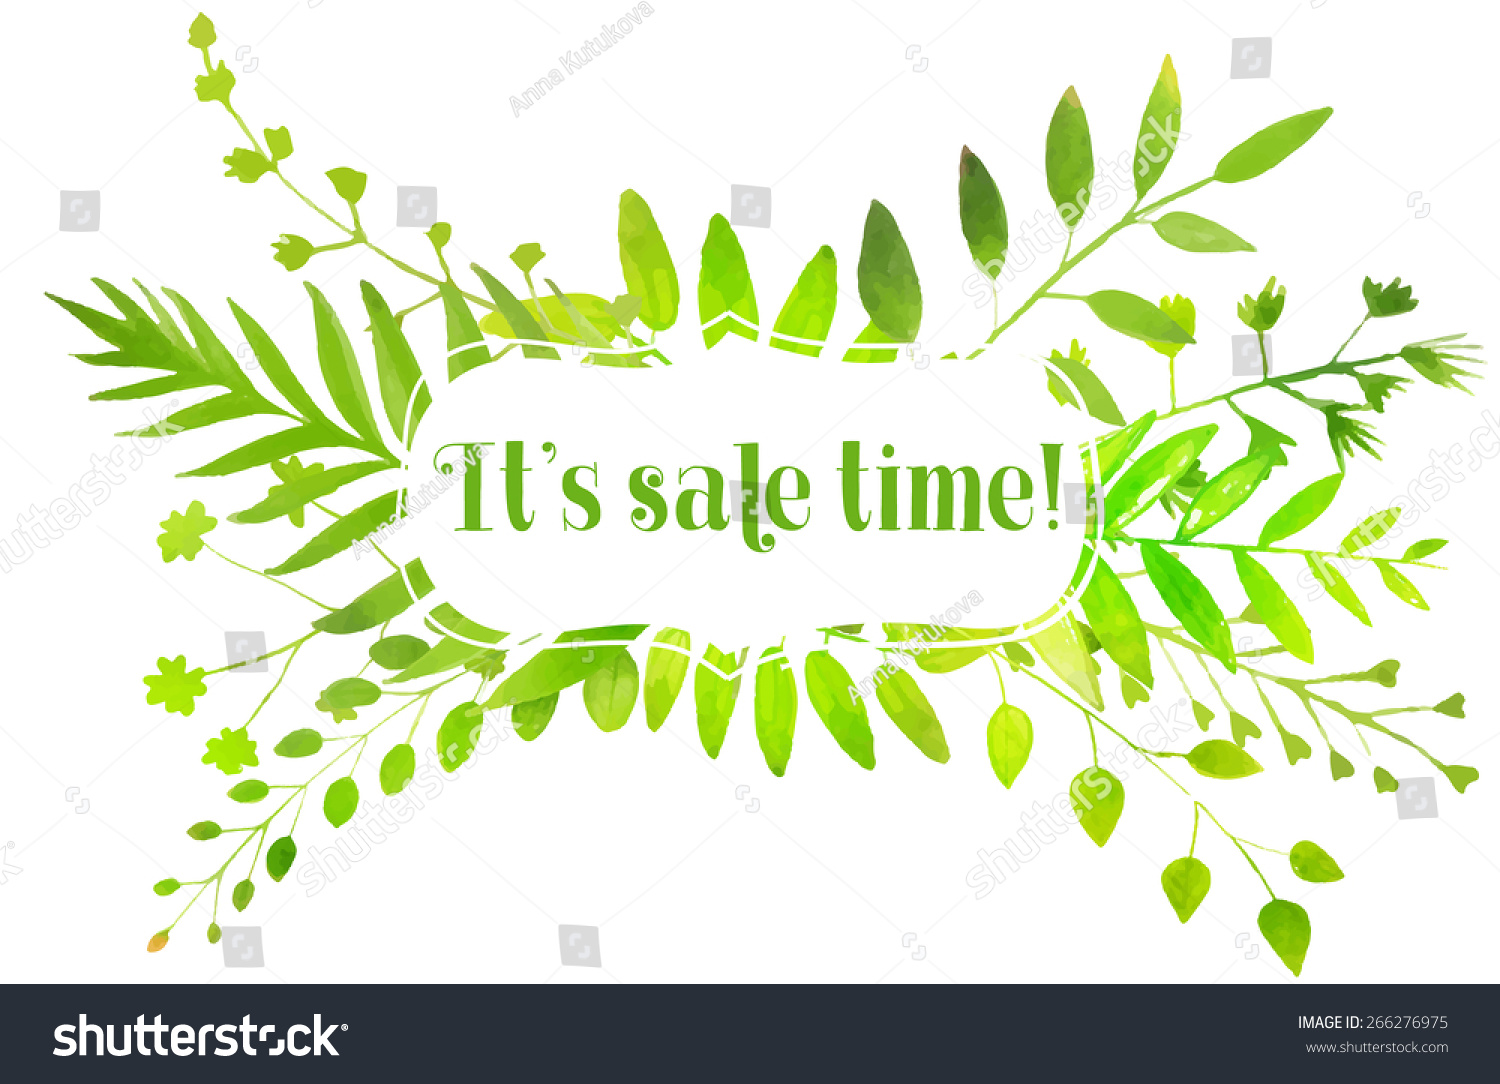 Spring frame with watercolor bright green leaves and text it's sale time. Vector nature illustration. #266276975